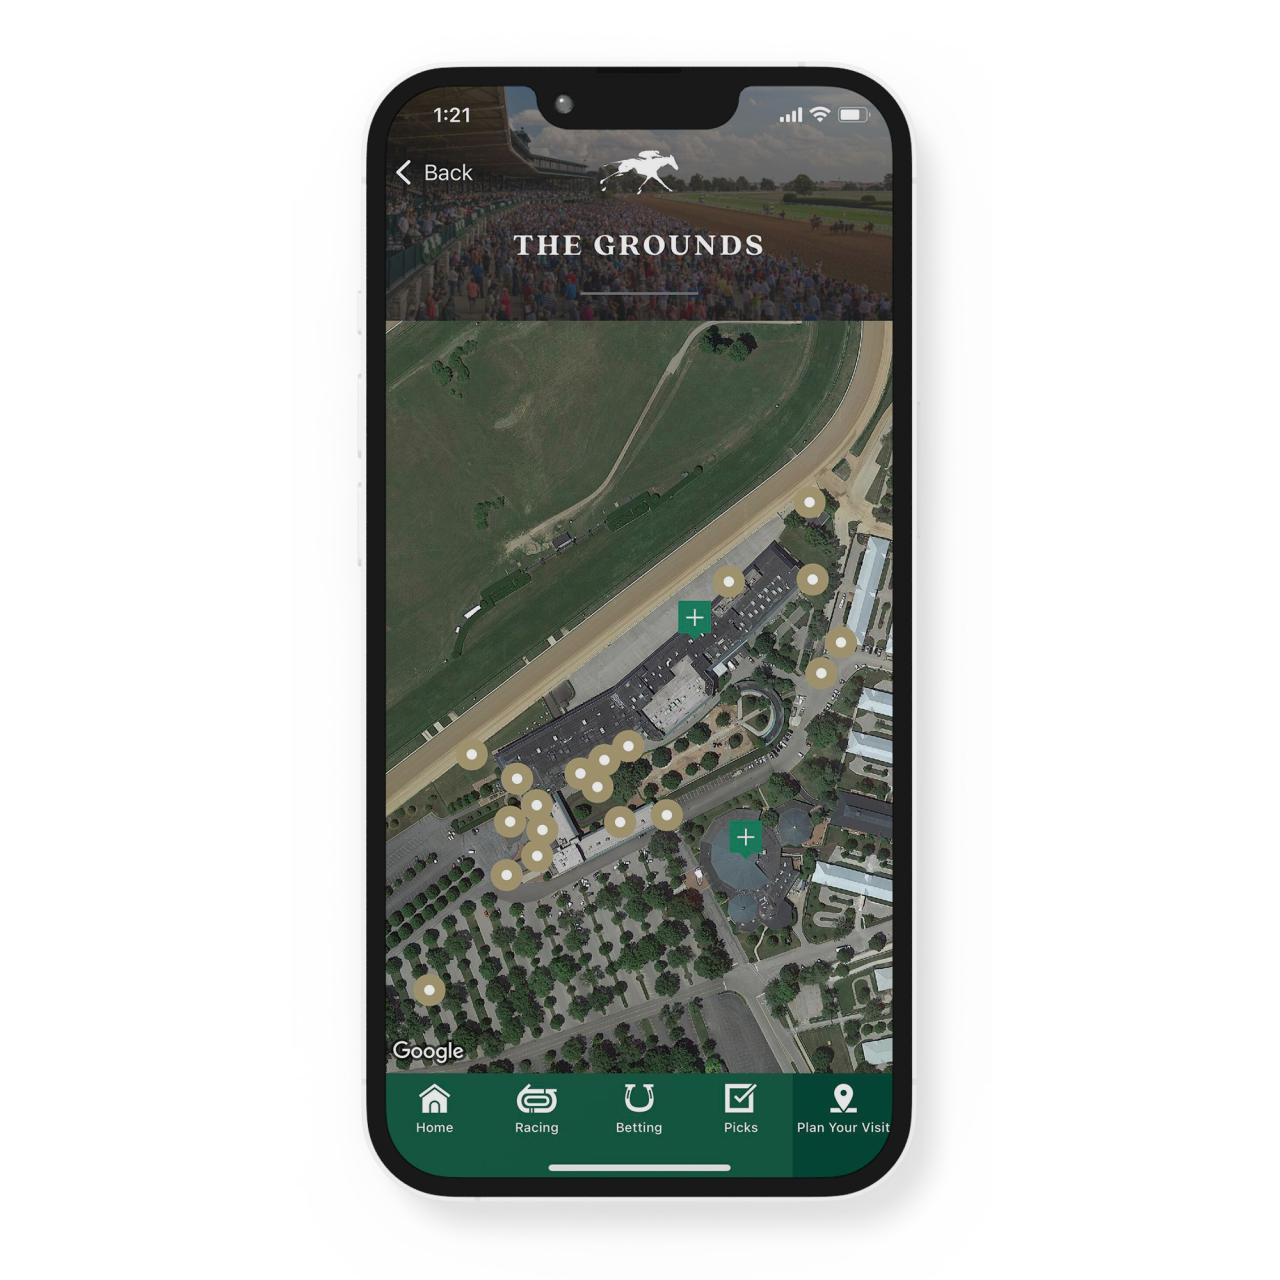 Keeneland grounds screen in the mobile app. 